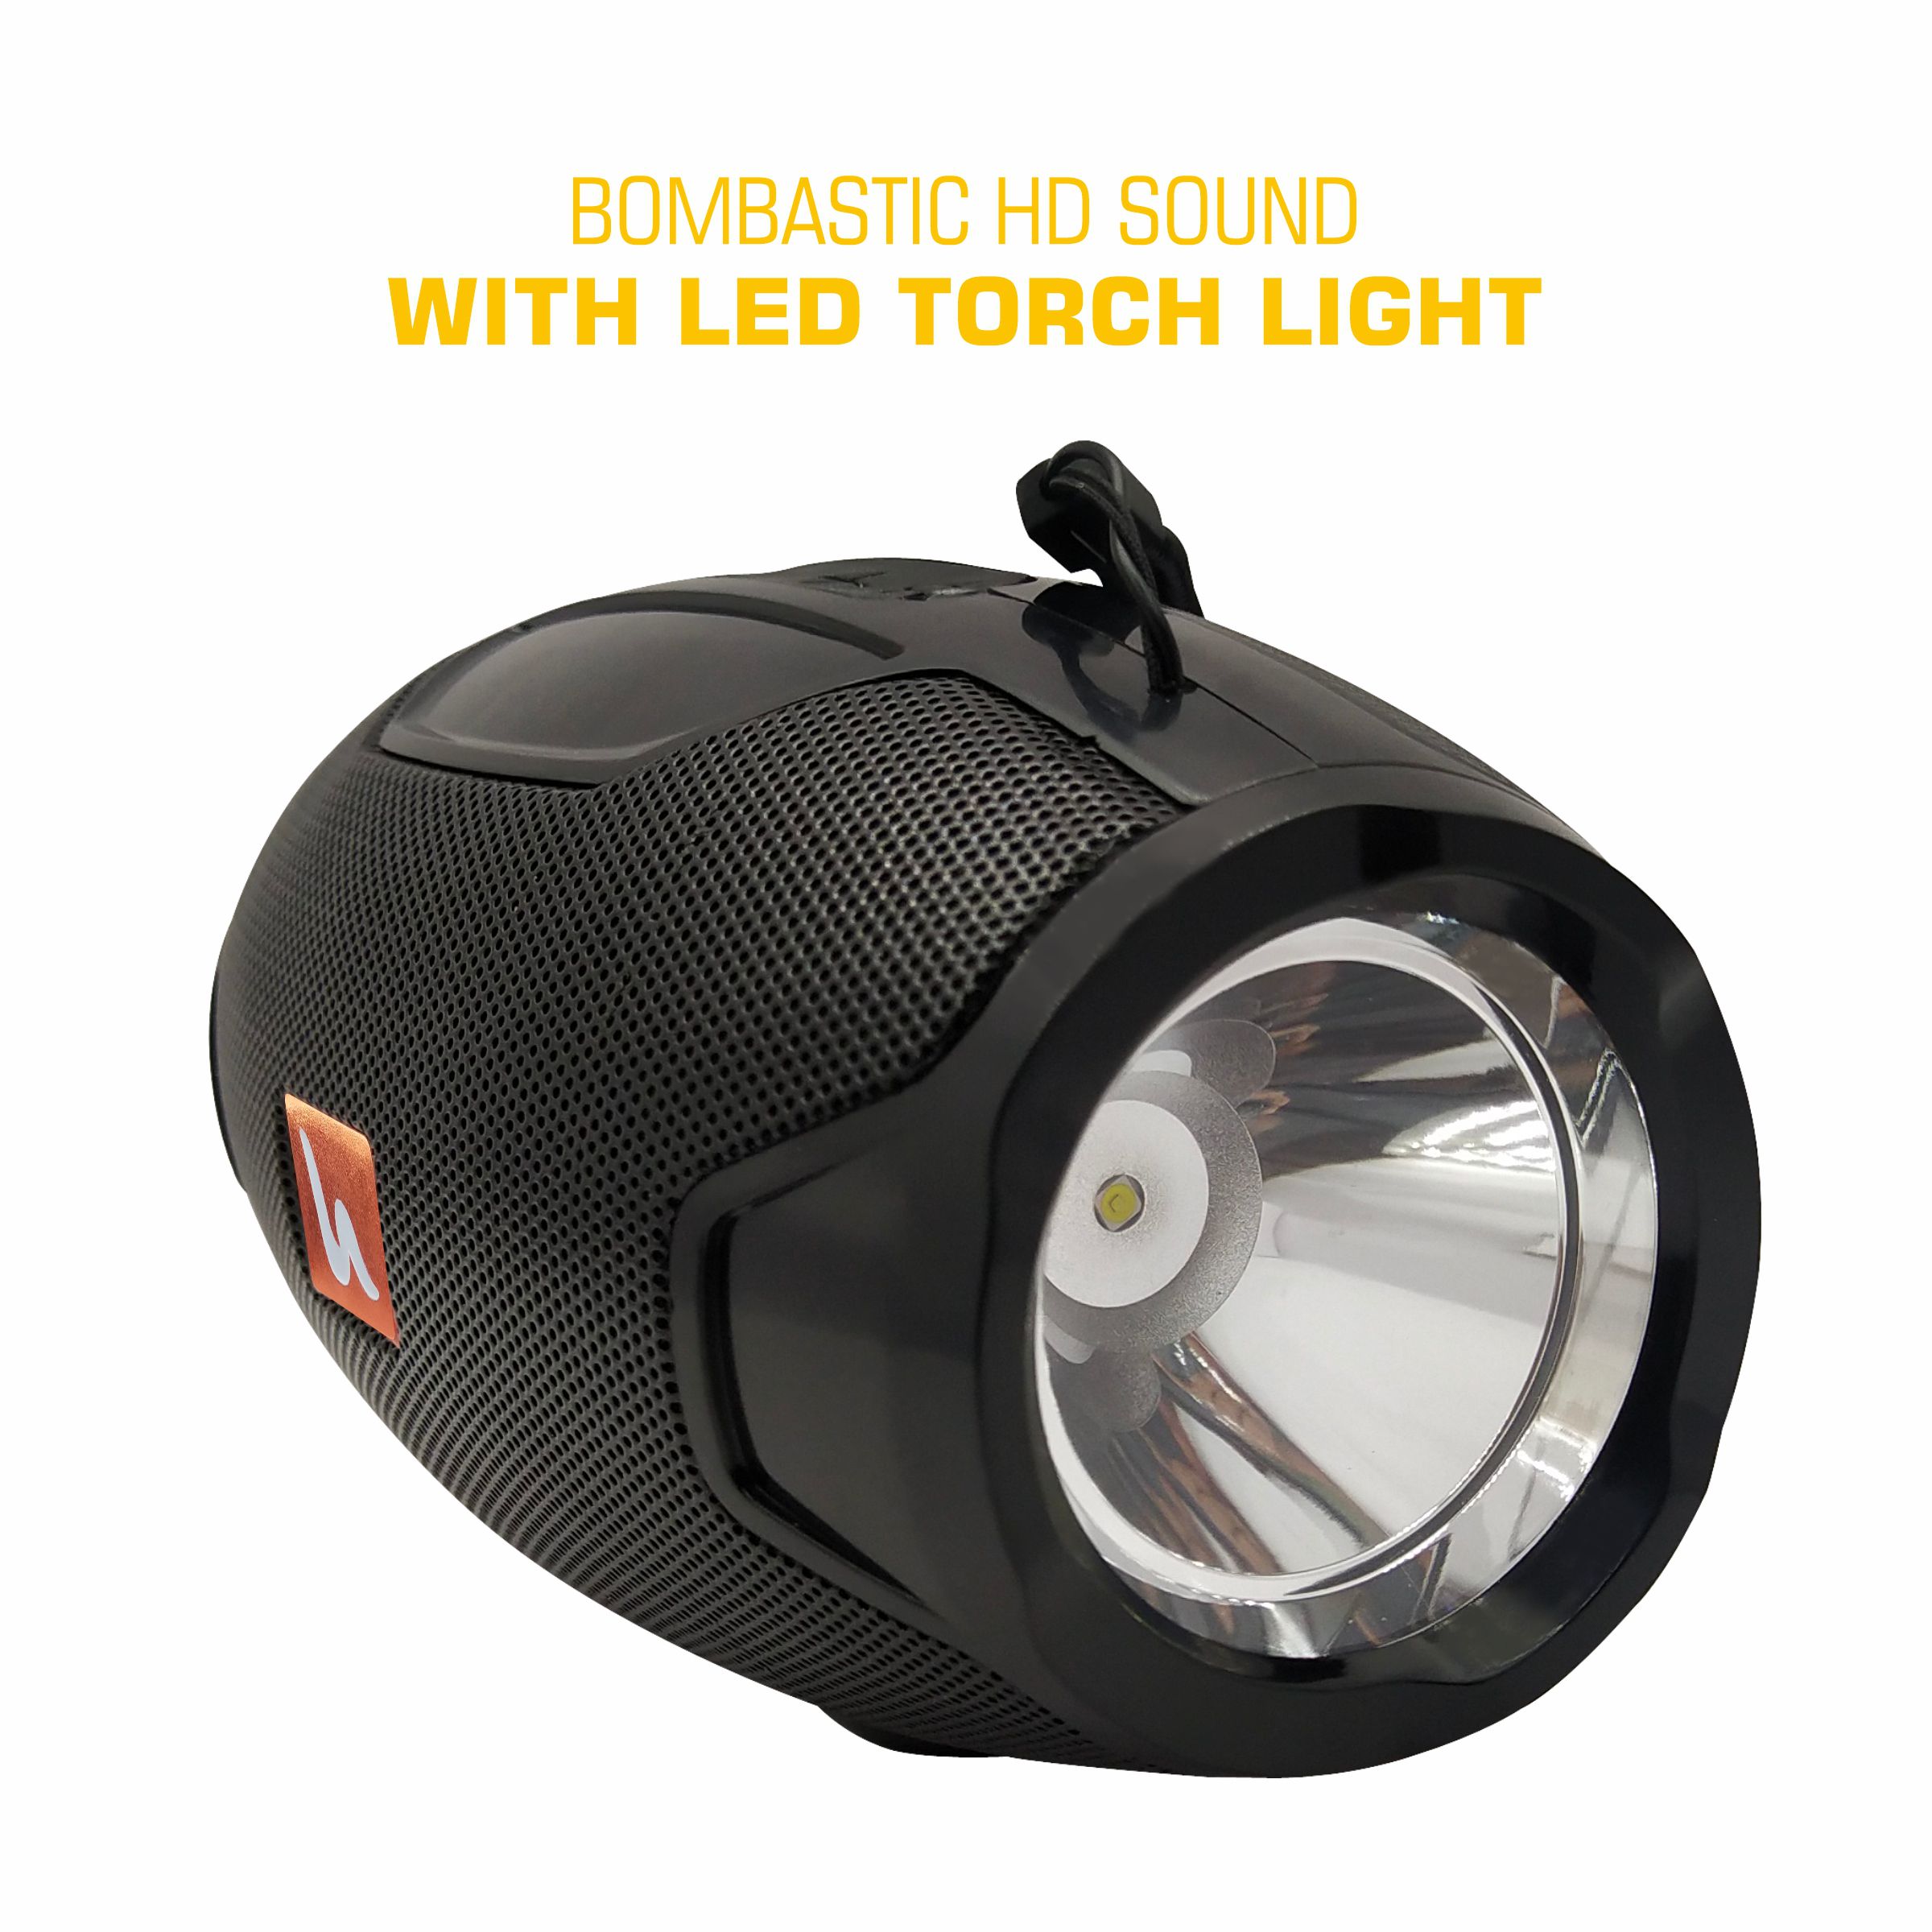 AO-105 6HOURS PLAYTIME WITH TOURCH LIGHTWEIGHT PORTABLE SPEAKER,BLUETOOTH V5.0,BUILT in mic,SUPPORT SD-CARD SPEAKER